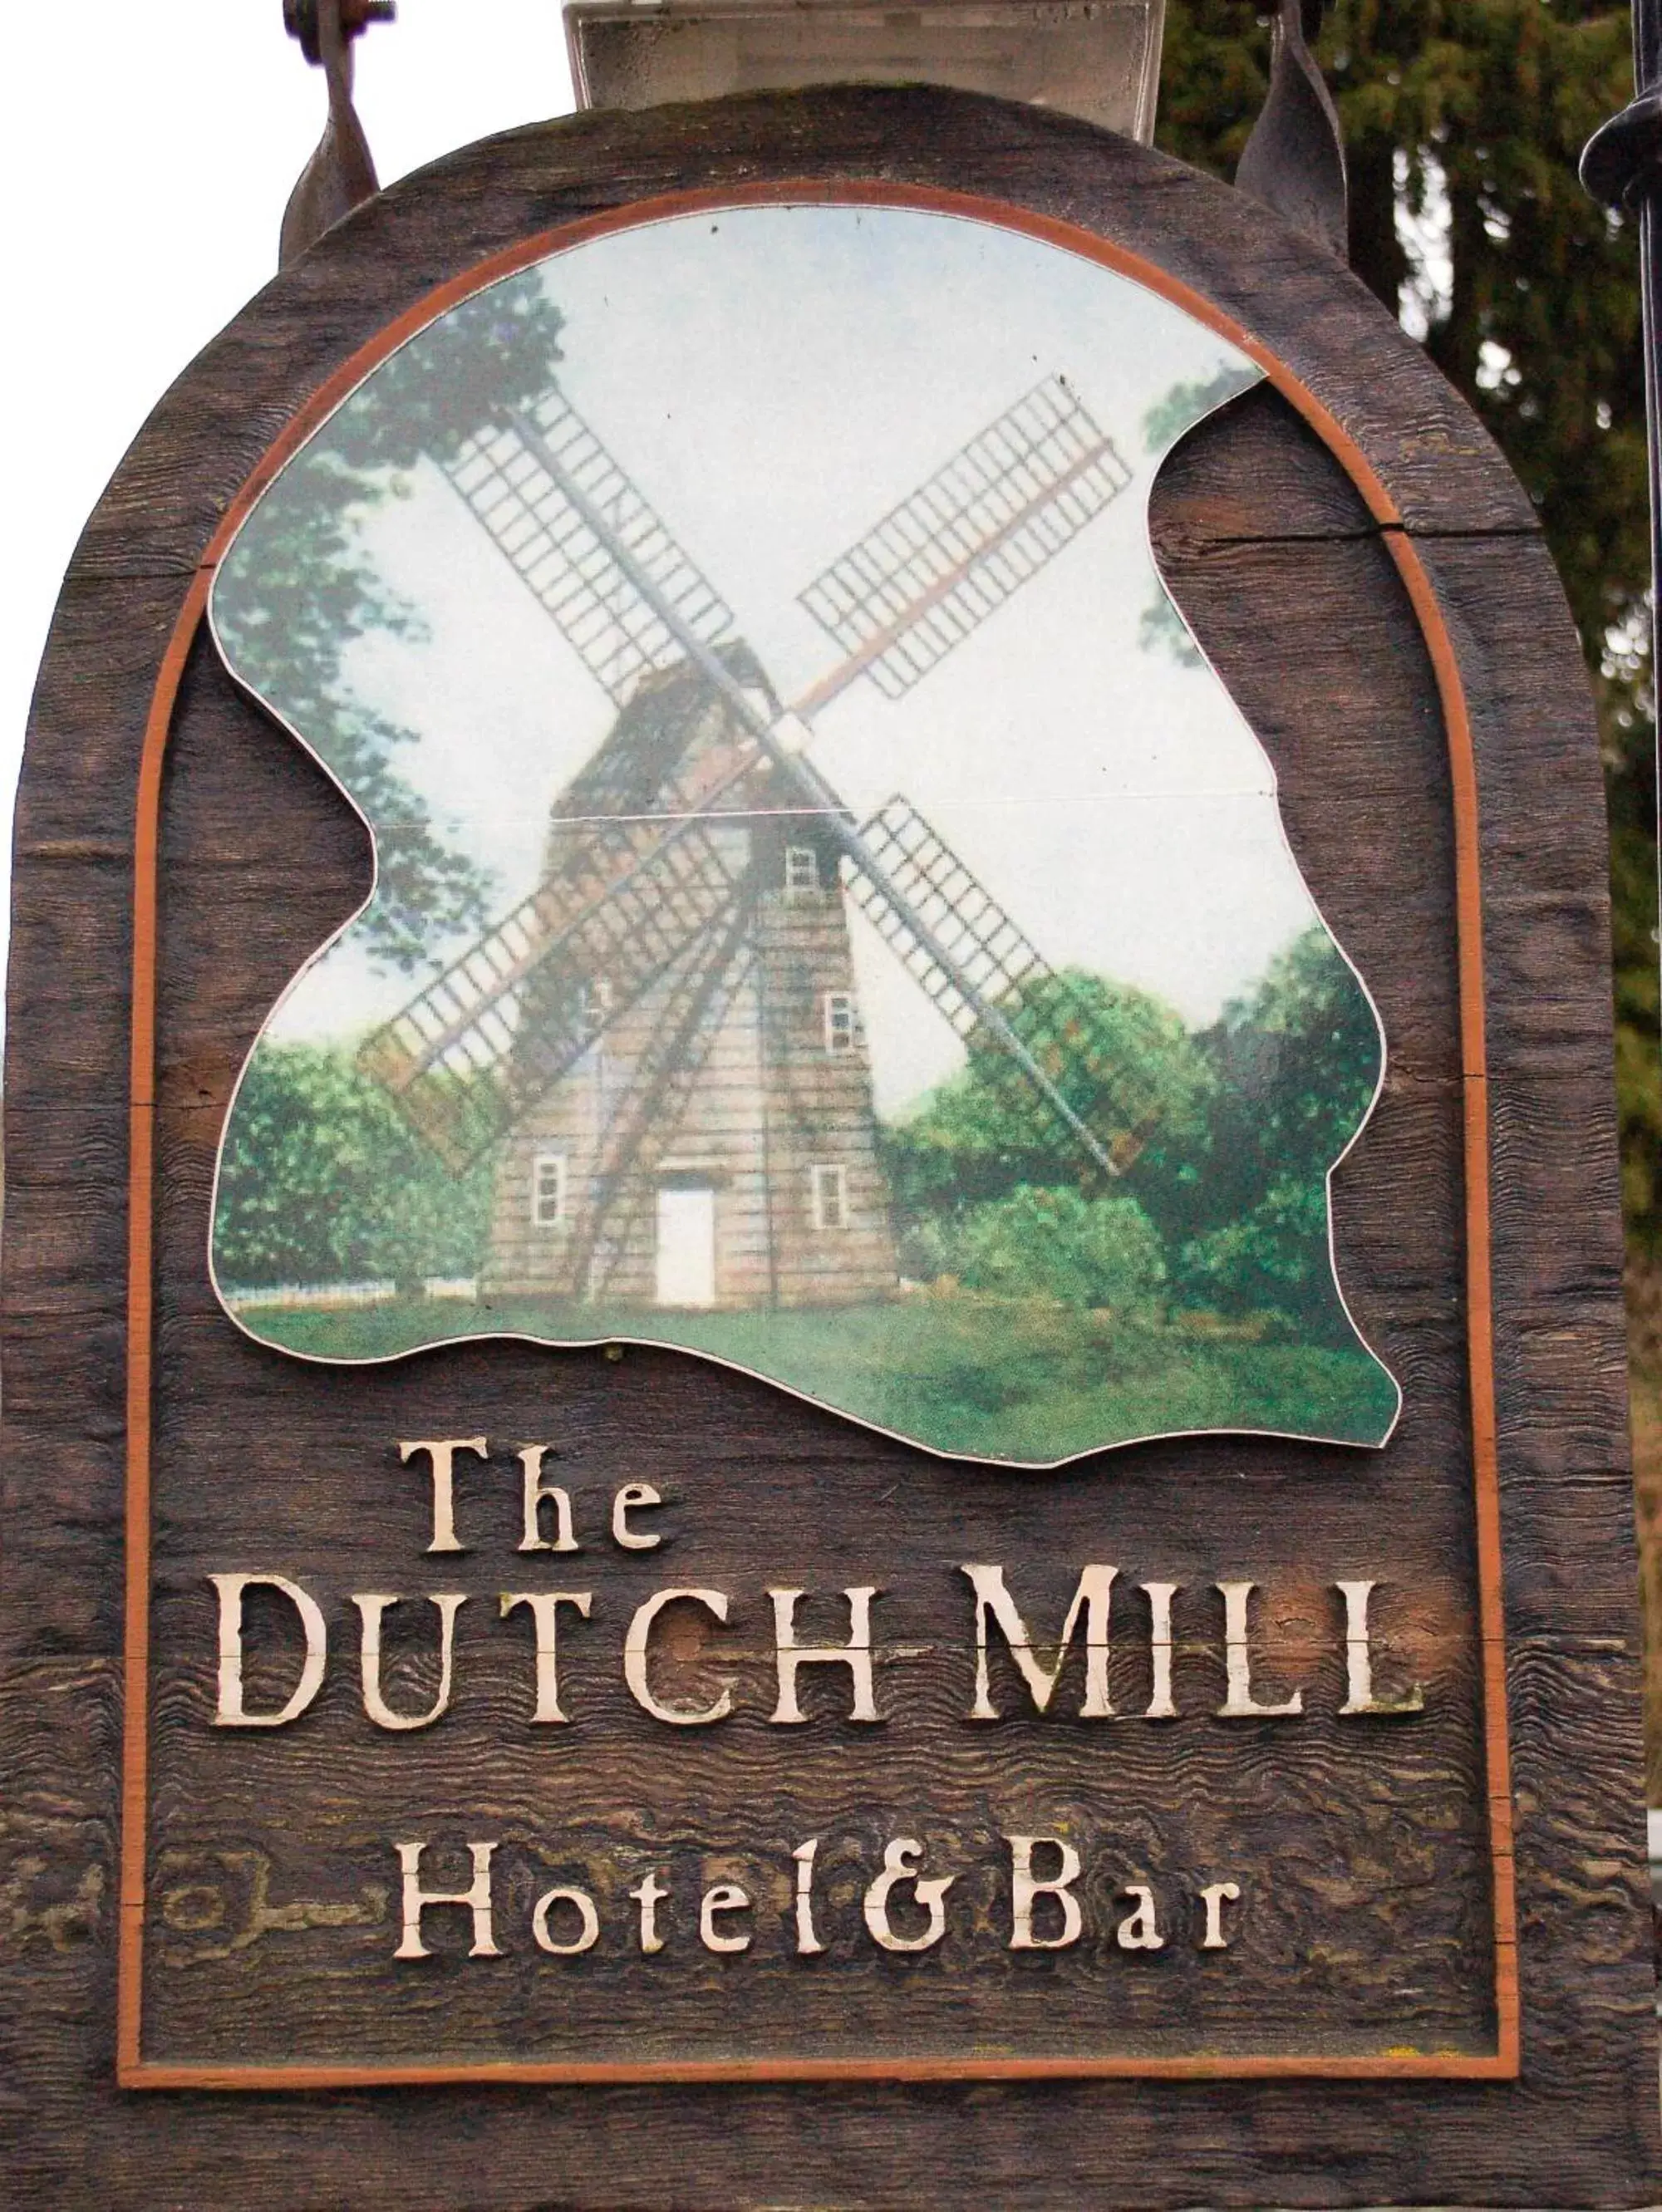 Property logo or sign in The Dutch Mill Hotel